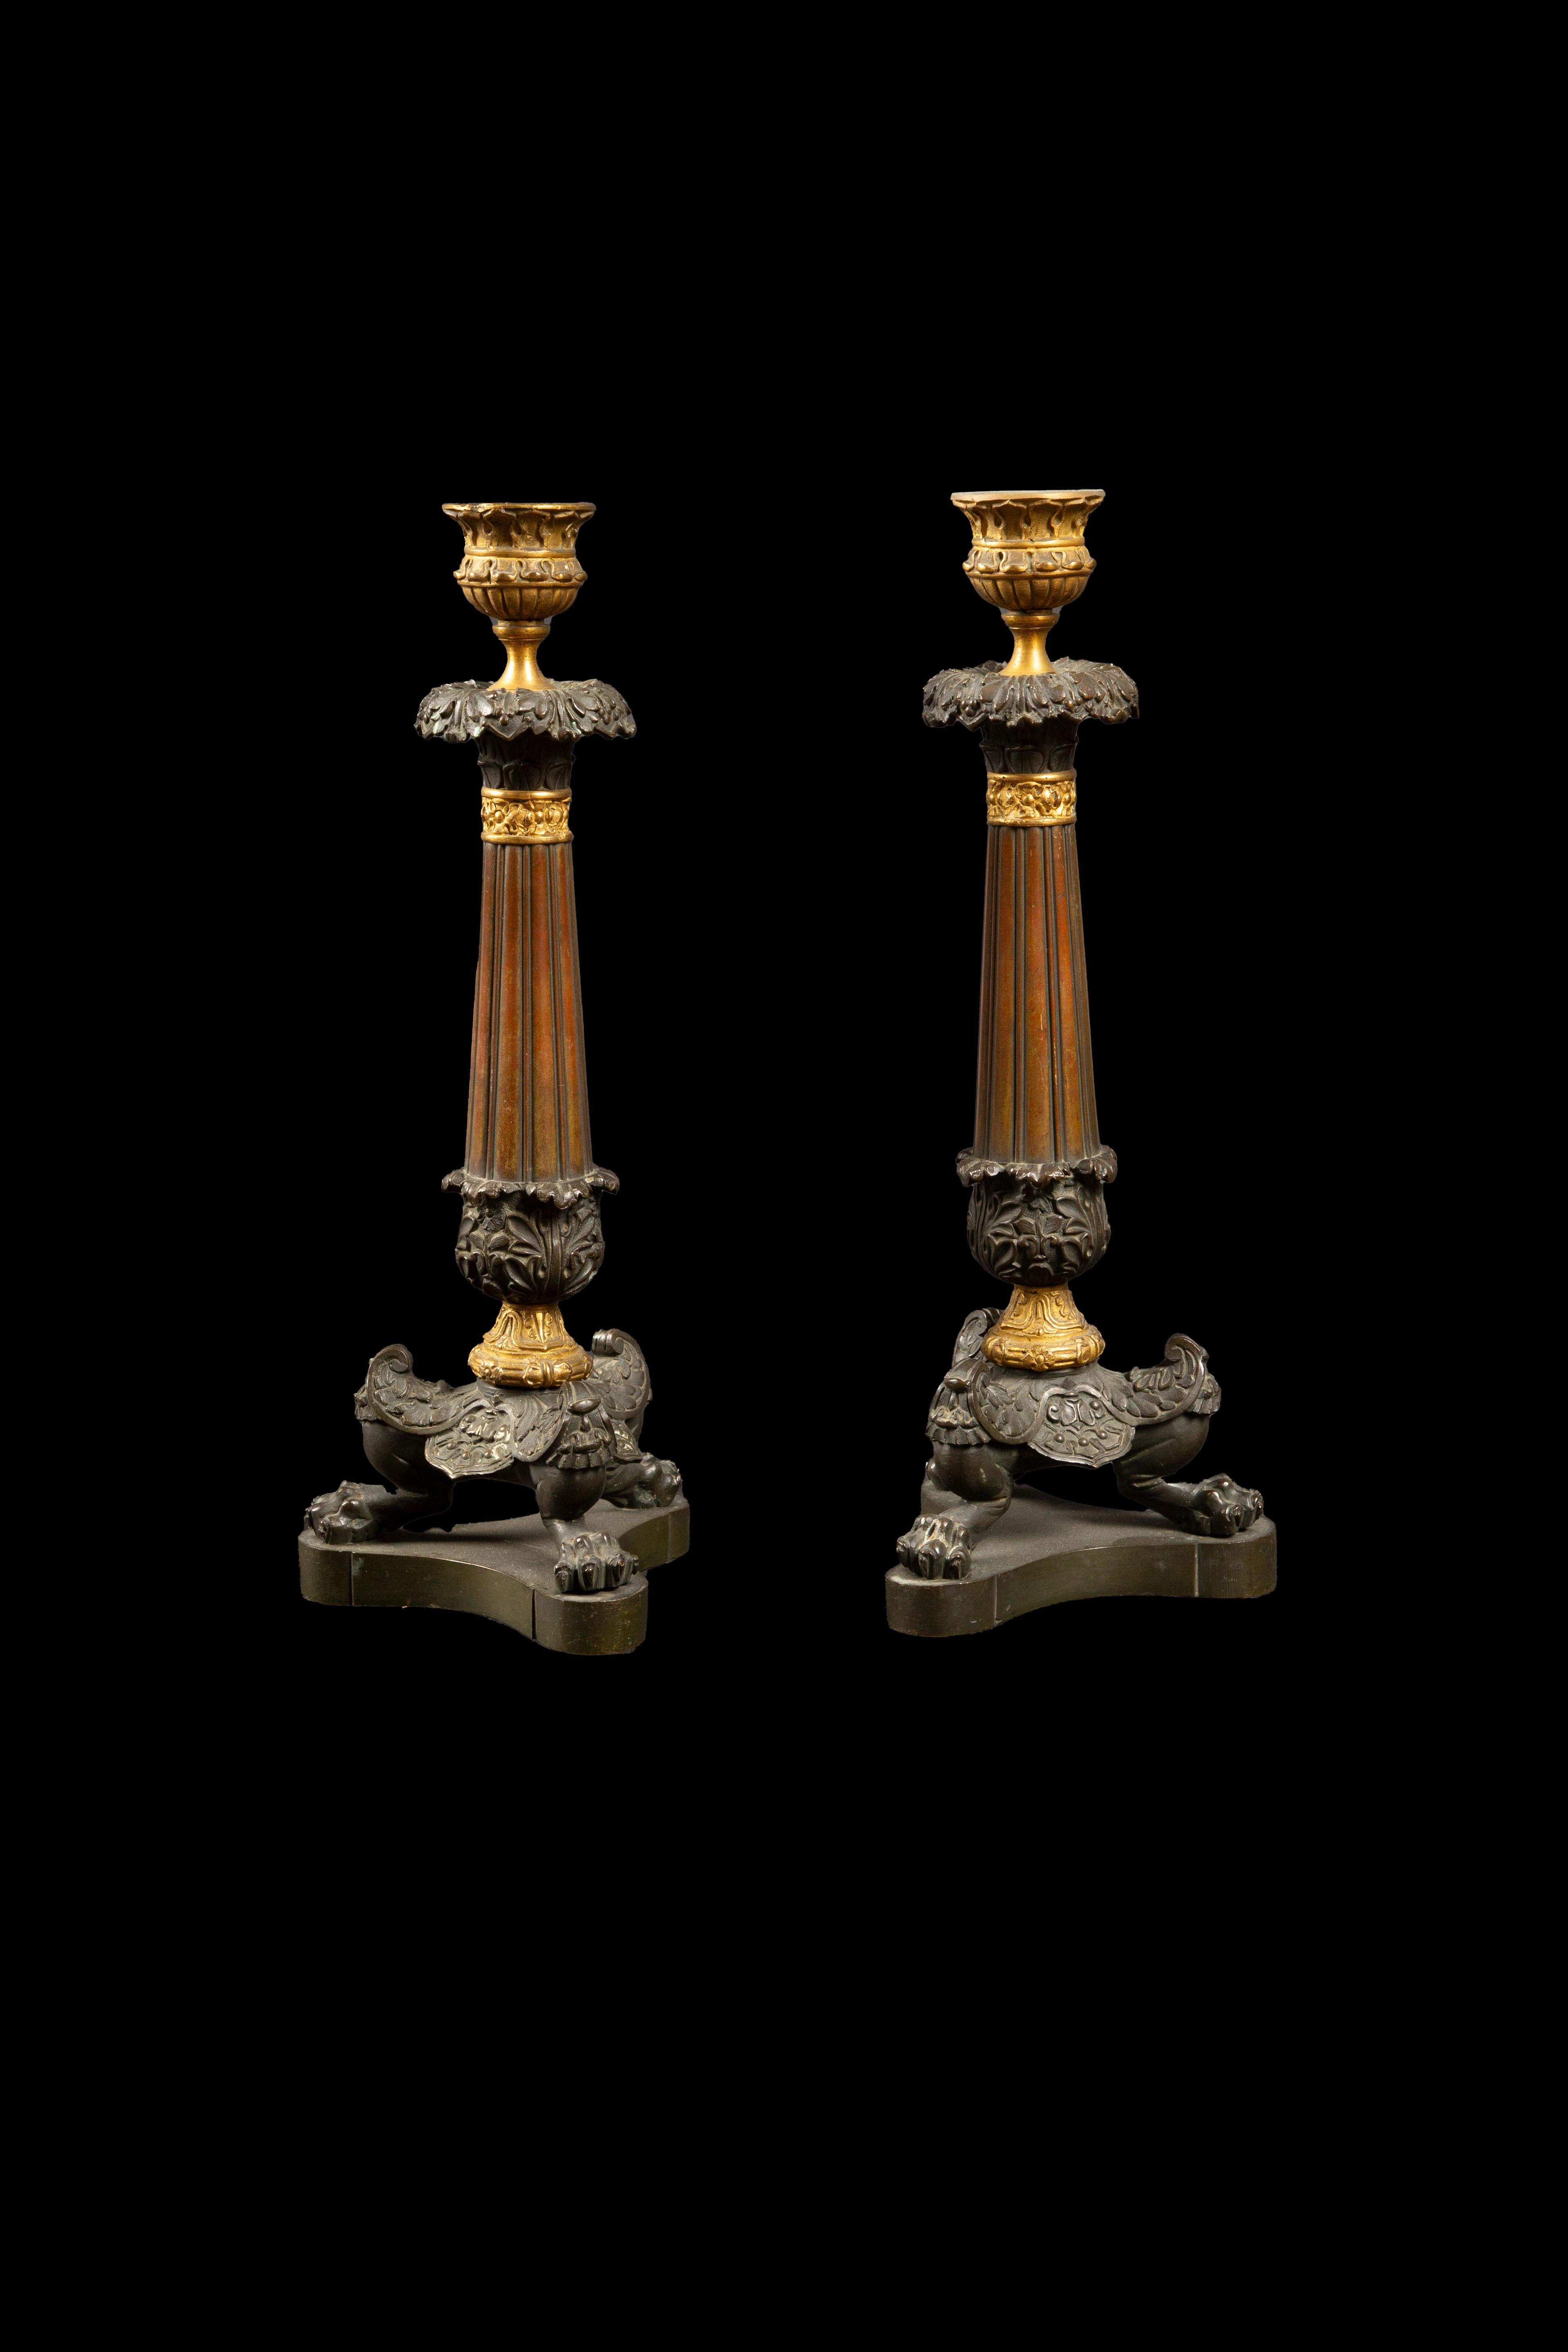 Early 19th Century pair of partially gilt bronze candle sticks with a acanthus leaf decoration, terminating in tripod lion's paw feet.